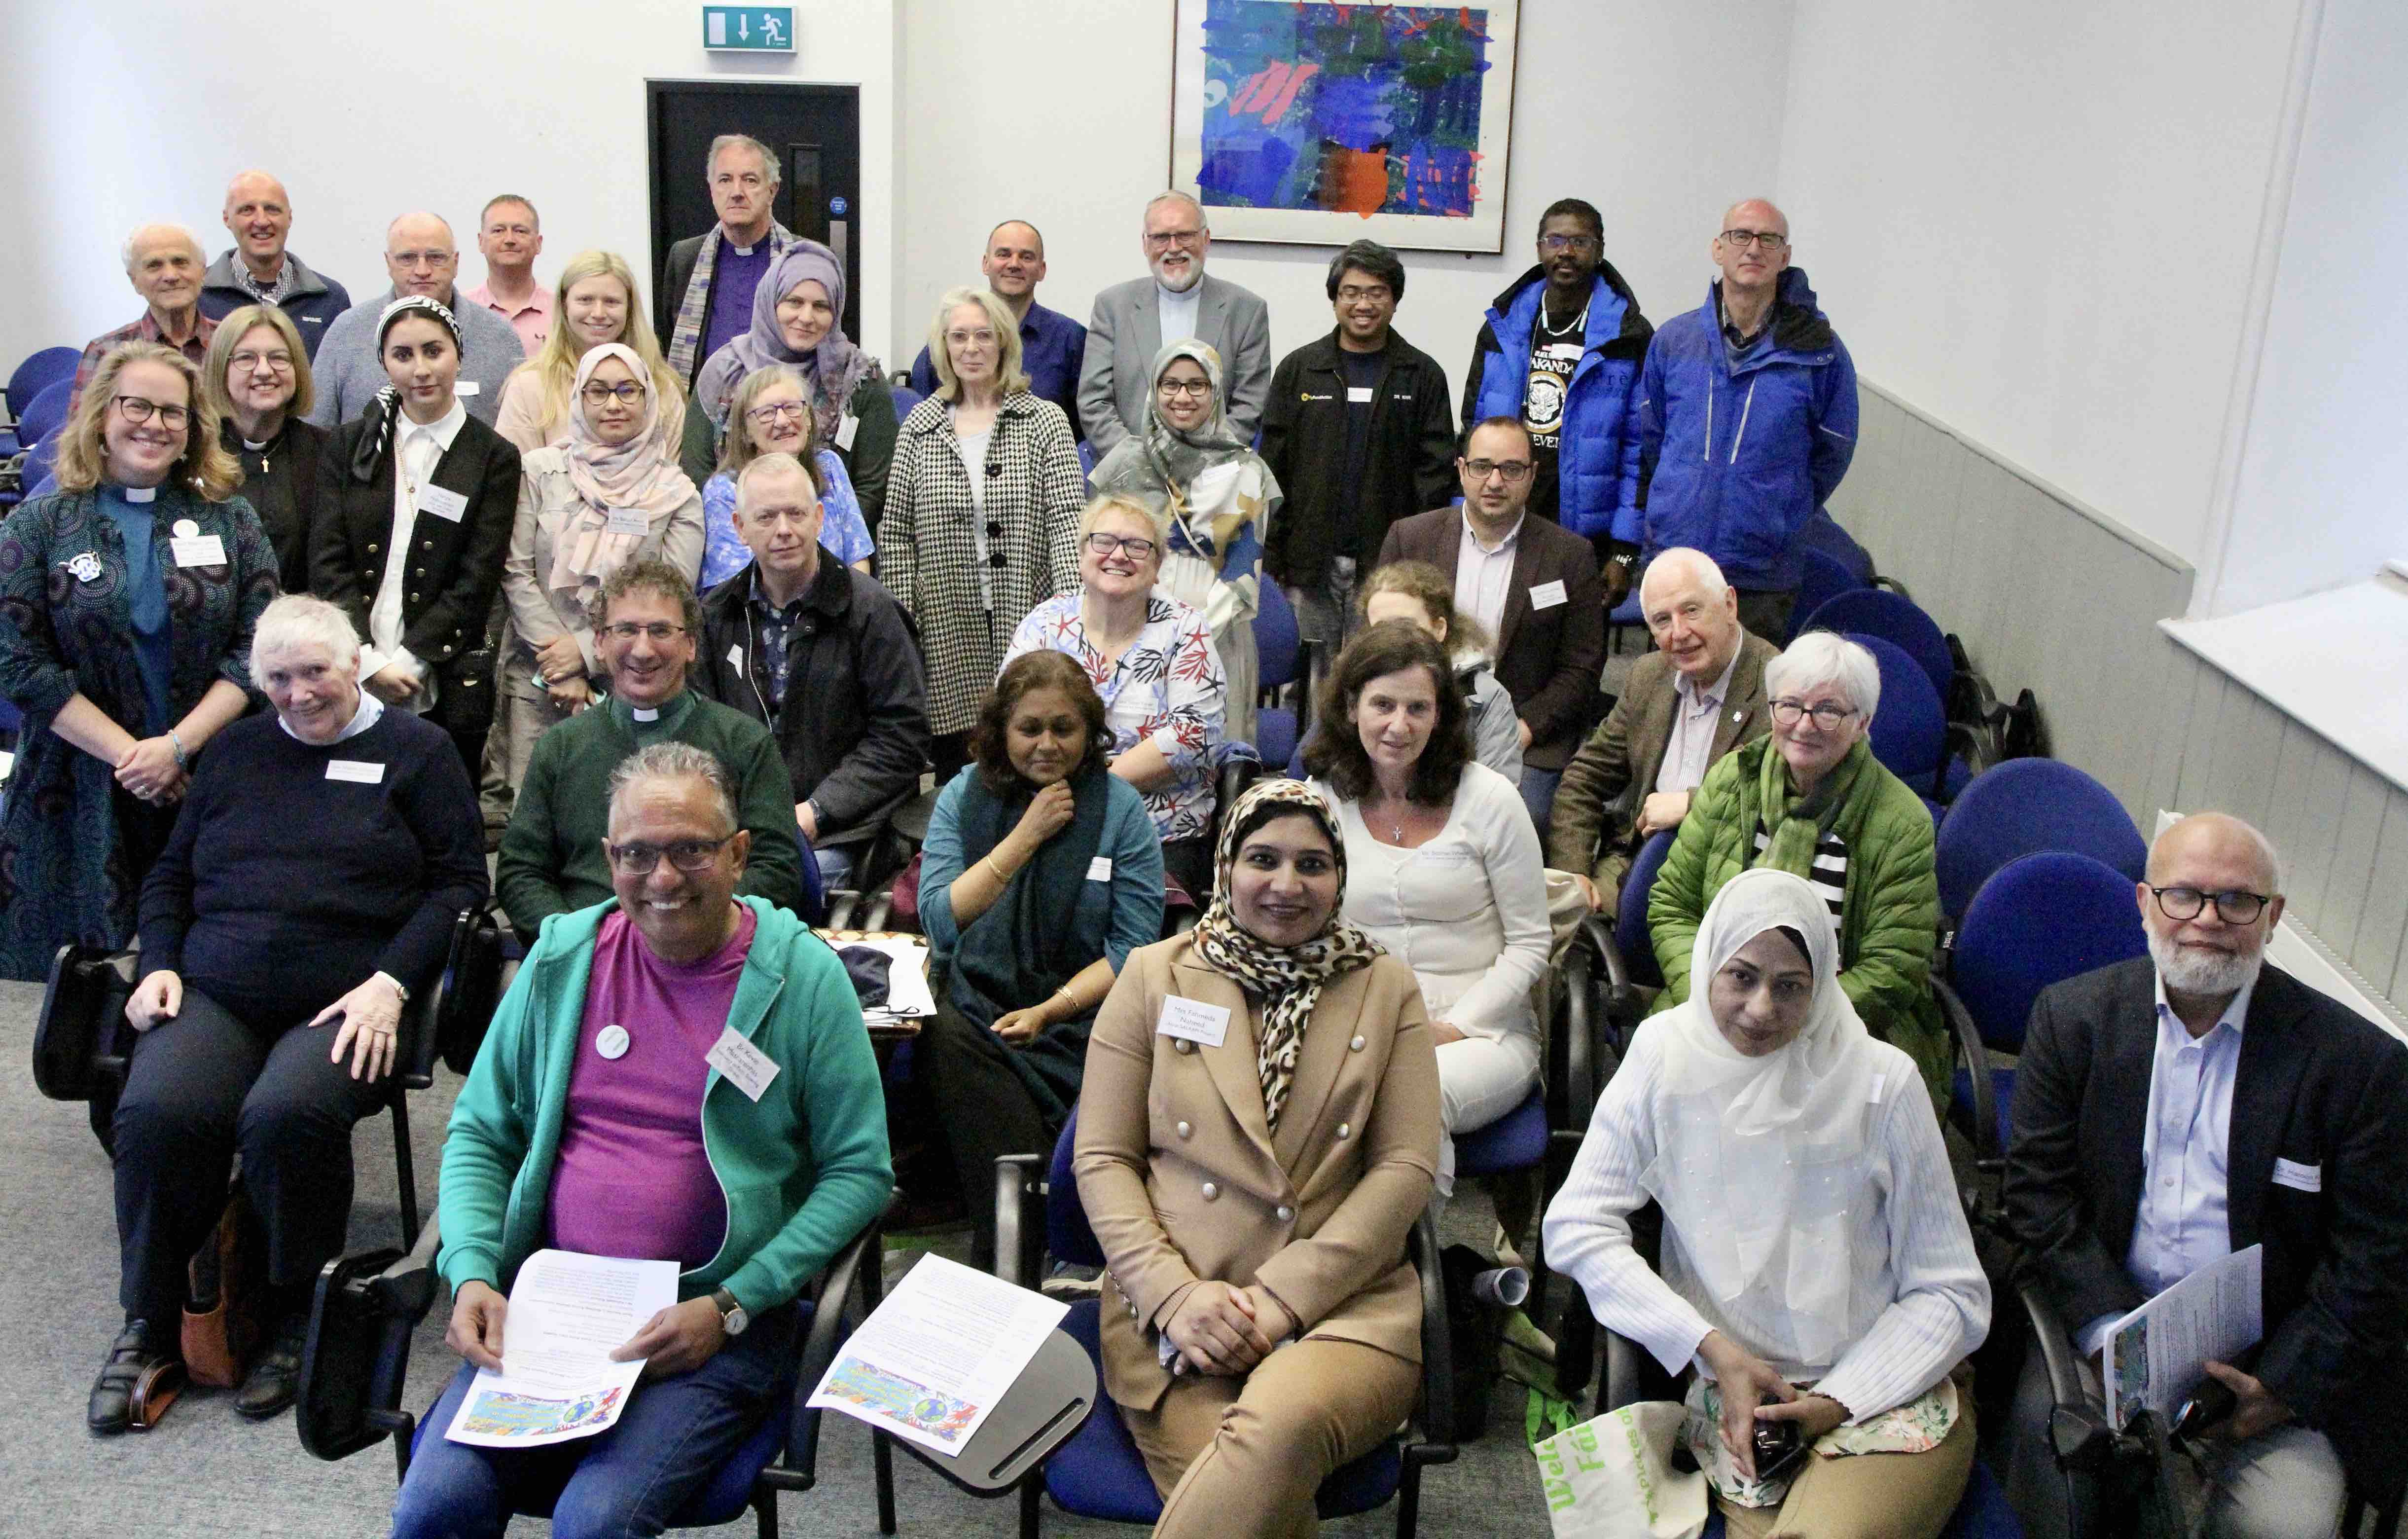 Organisers and participants in the Dialogue of Friendship event in the Irish School of Ecumenics.